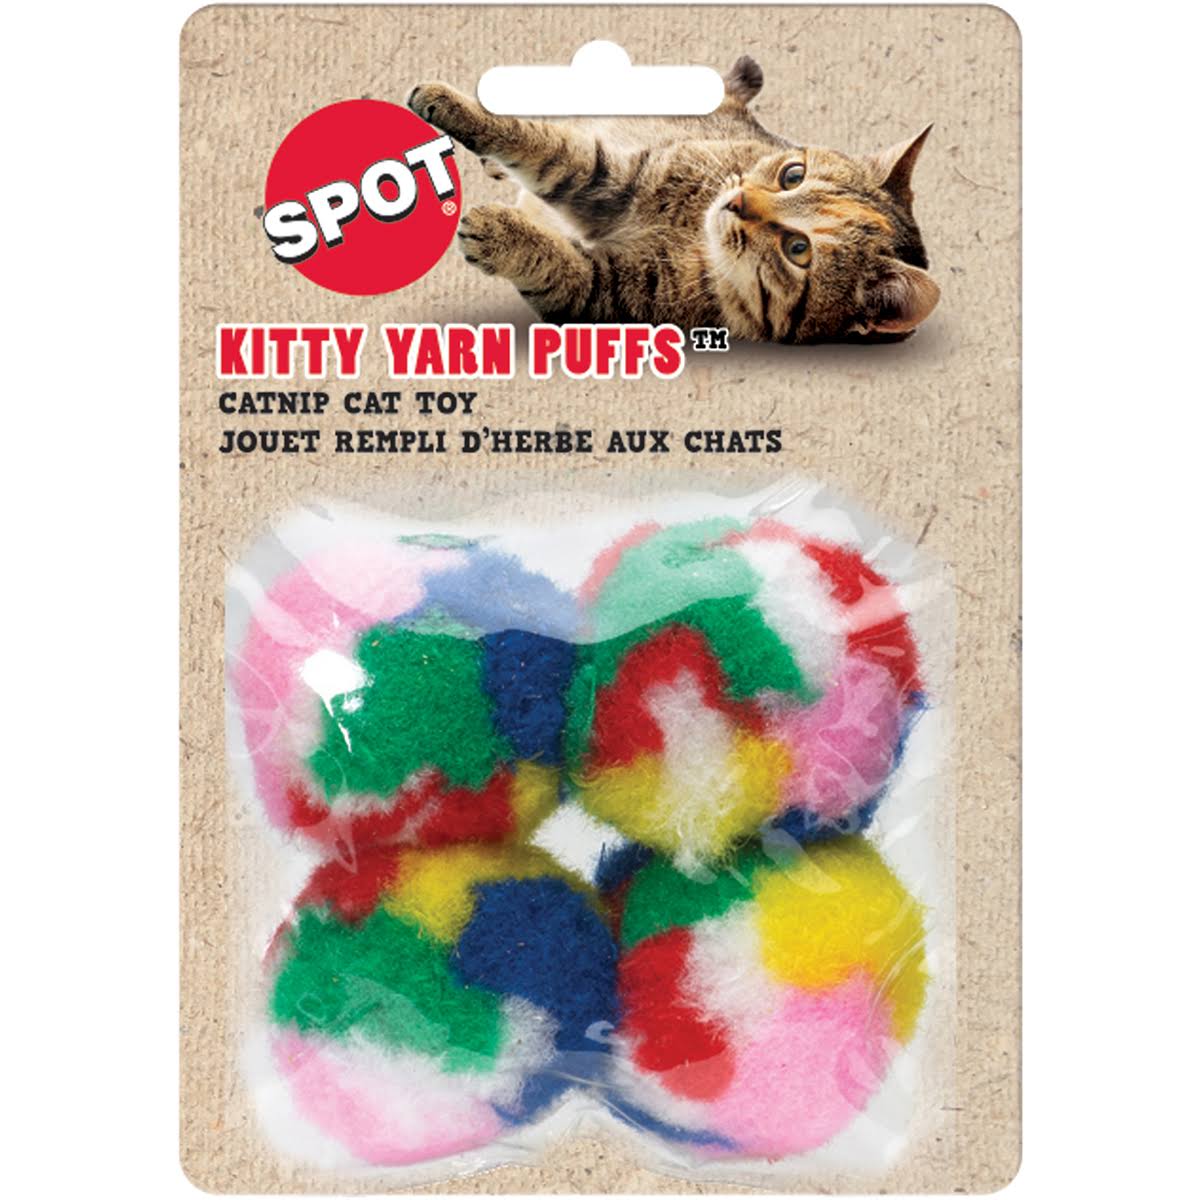 Spot Ethical Yarn Puffs Catnip Cat Toy - Small, x4